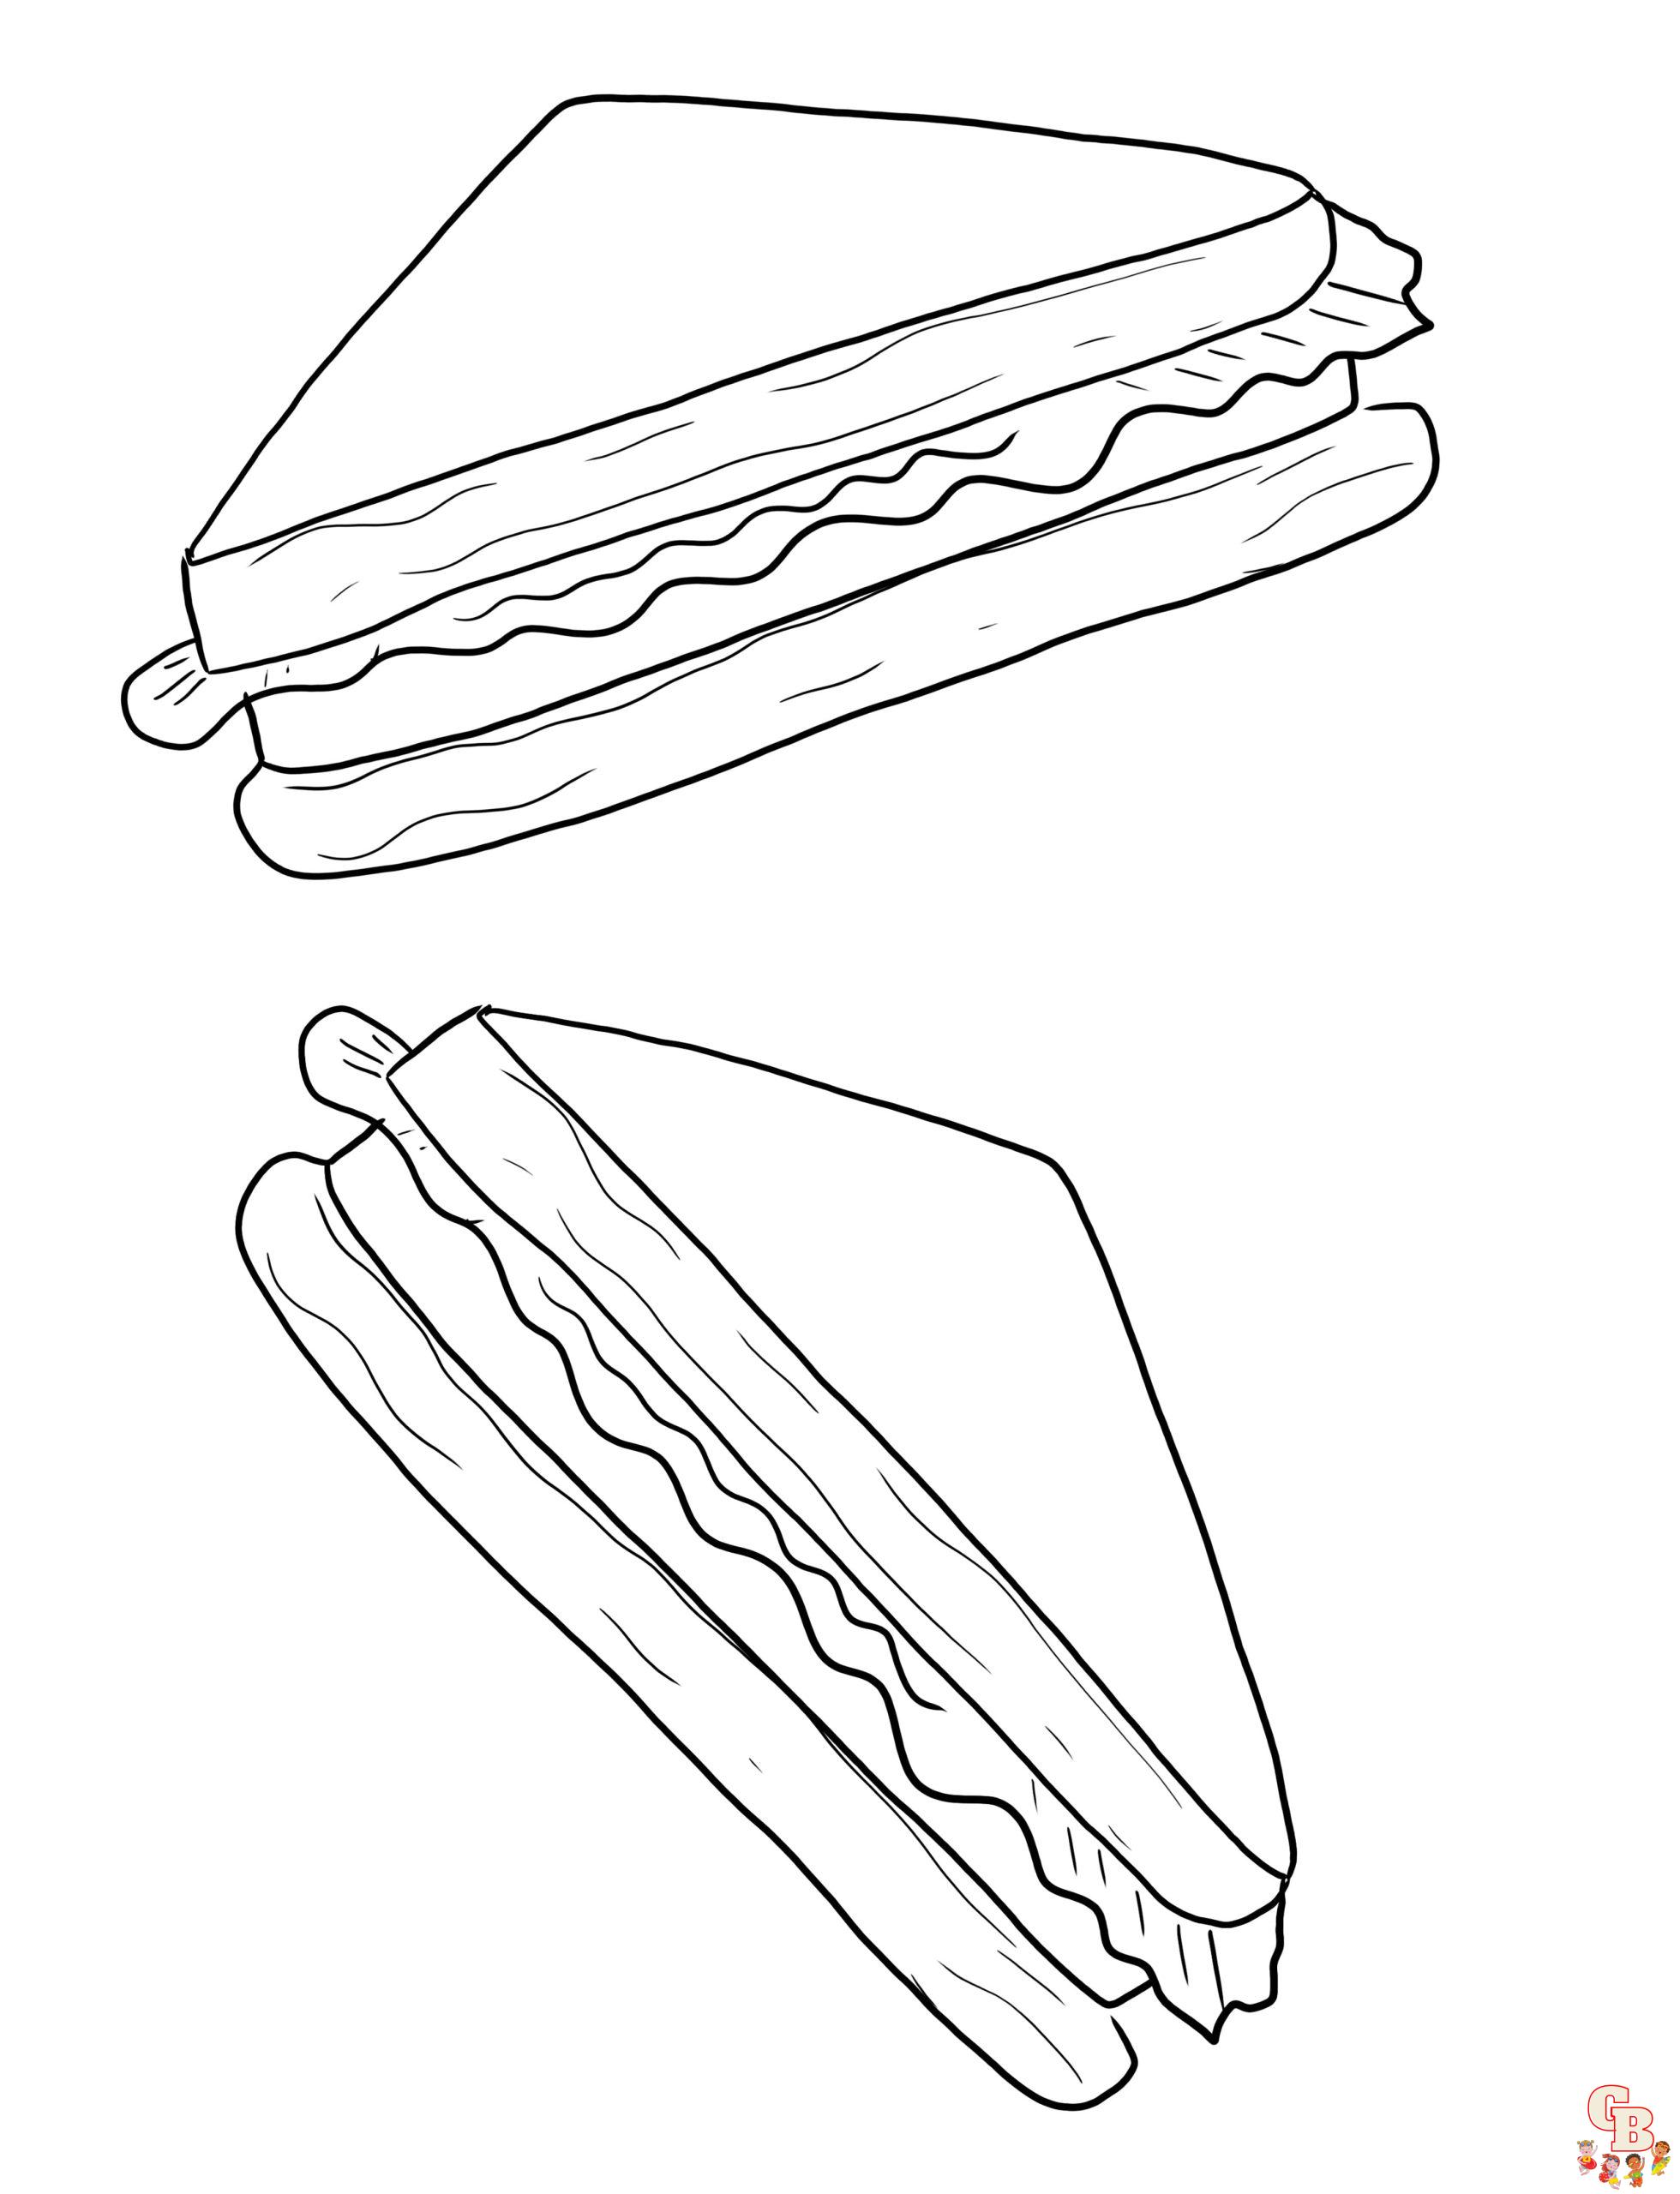 Sandwich coloring pages printable